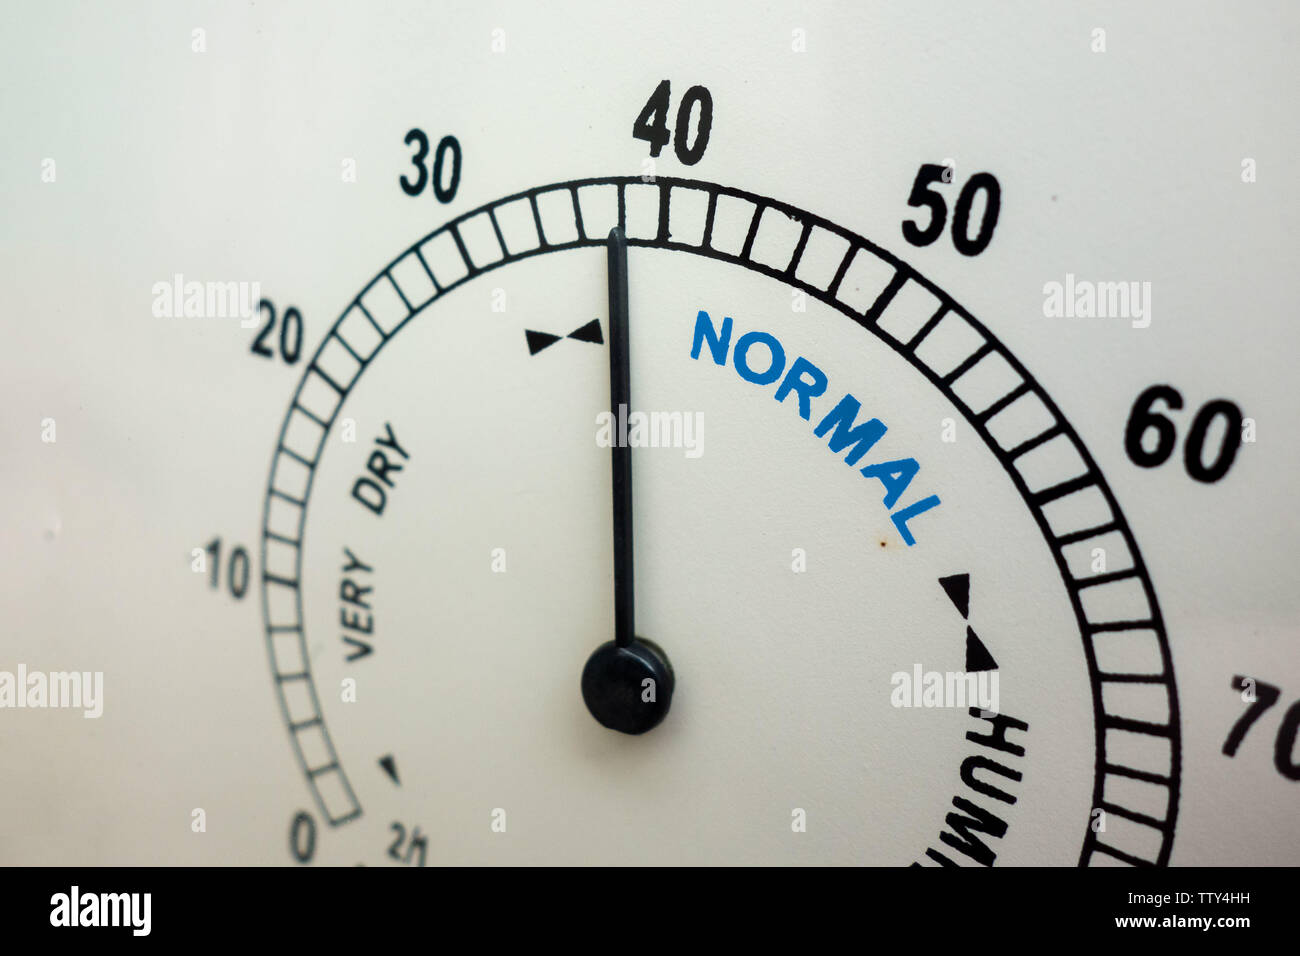 Humidity and weather conditions concept. Face of analog humidity indicator instrument with needle. Normal range is indicated. Humidor or cigar keeping Stock Photo